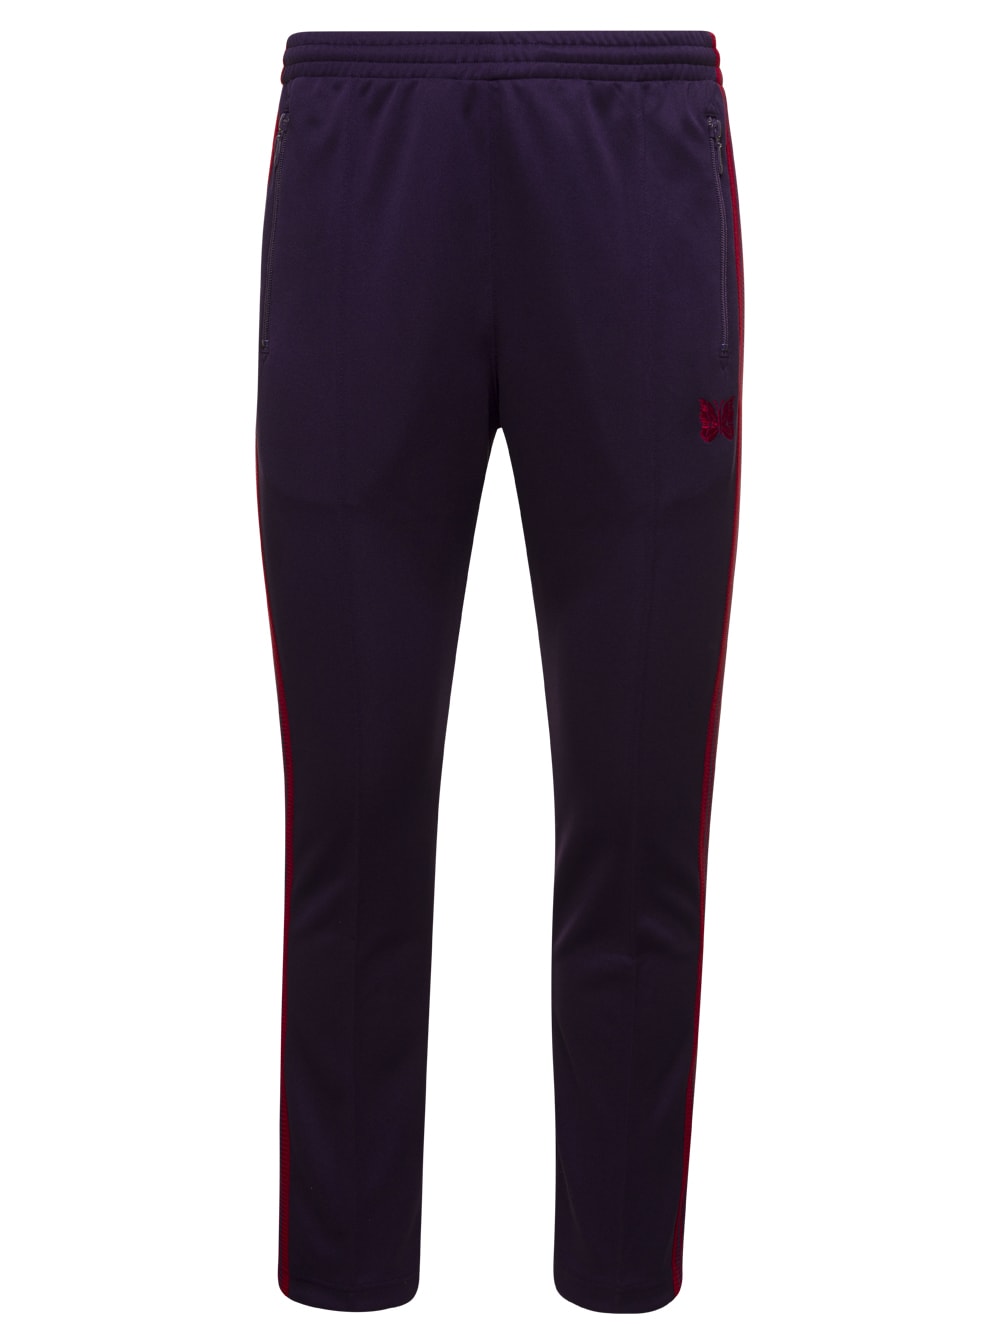 Needles Purple Track Pants With Side Stripes Detailing Man Needles